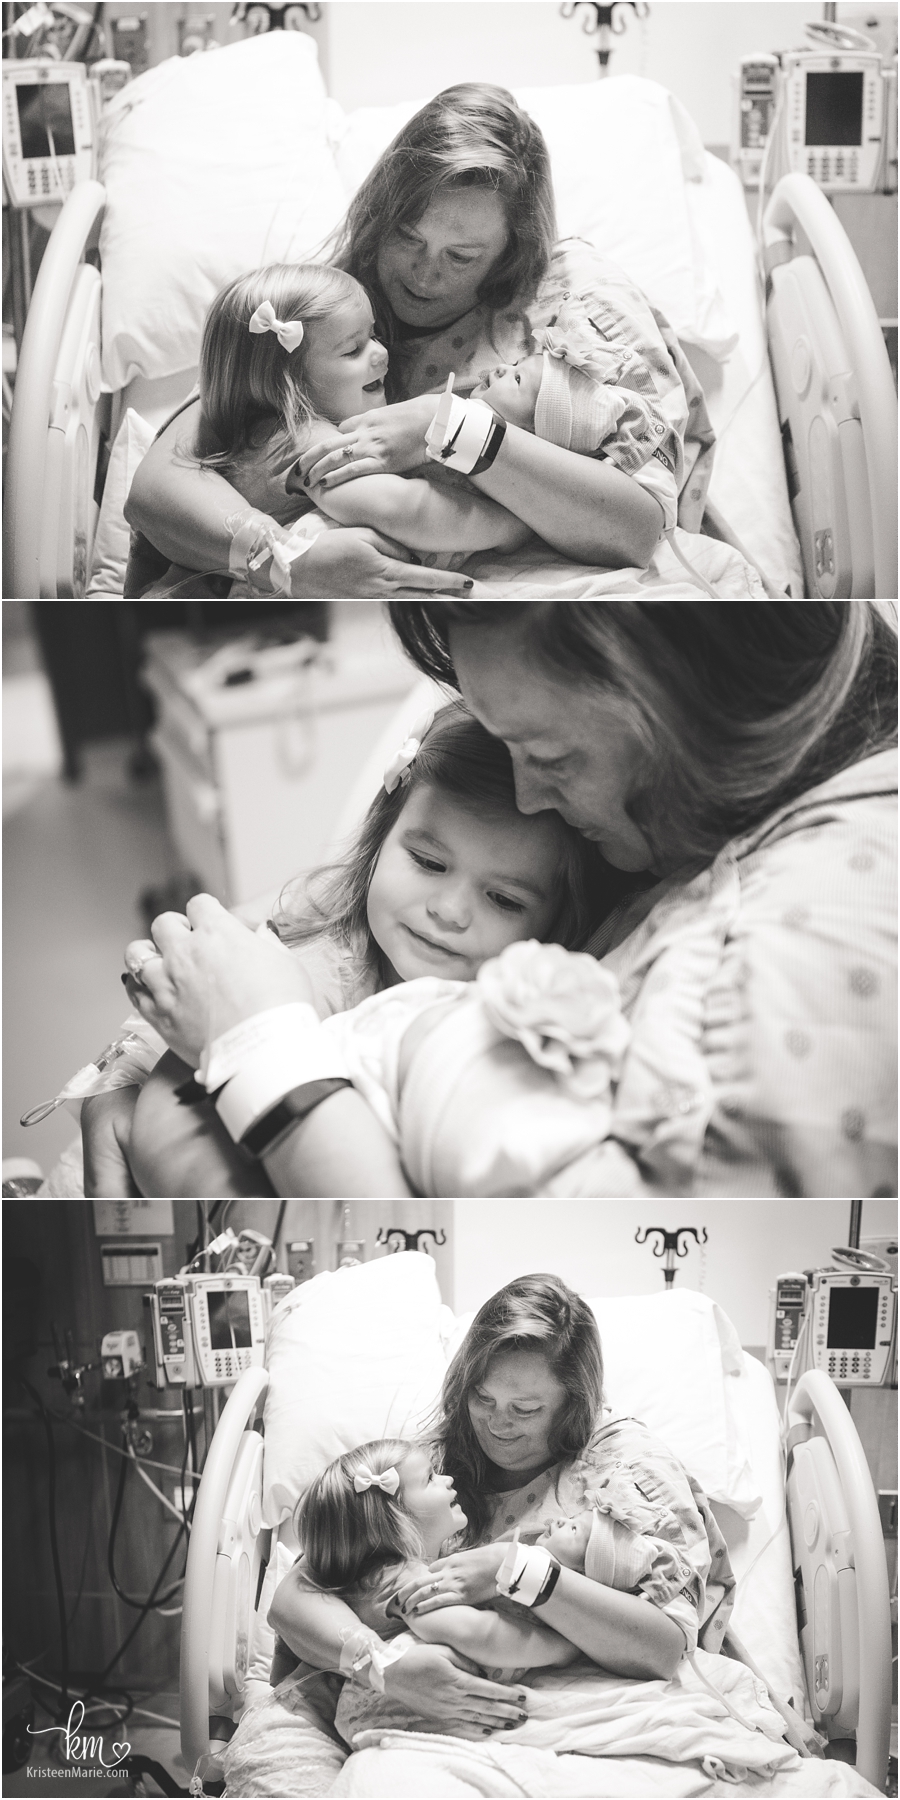 special moments with mom and her two daughers in hospital - birth photography